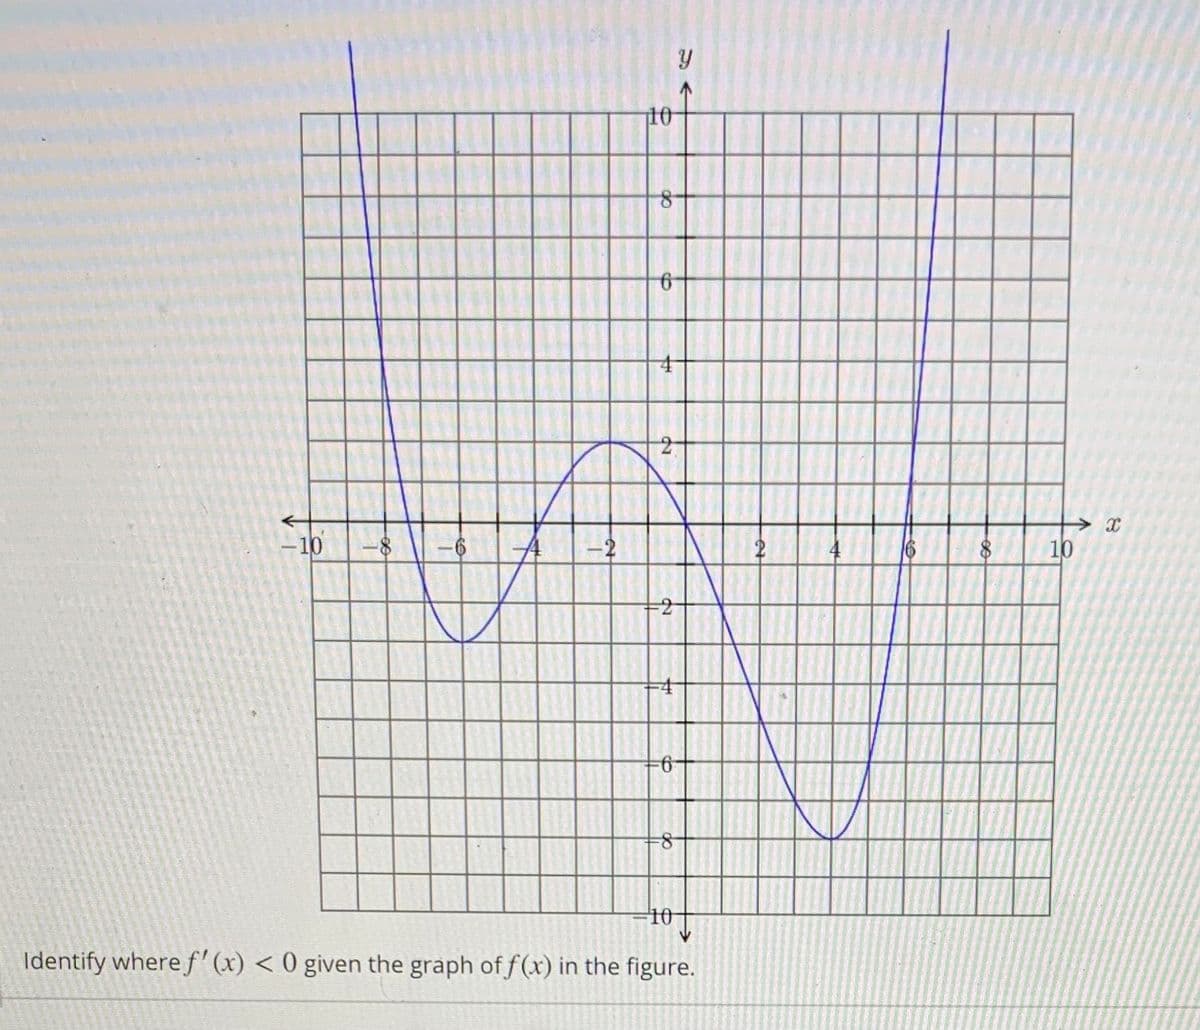 10
- 10
-2
10
10
Identify where f' (x) < 0 given the graph of f(x) in the figure.
do
